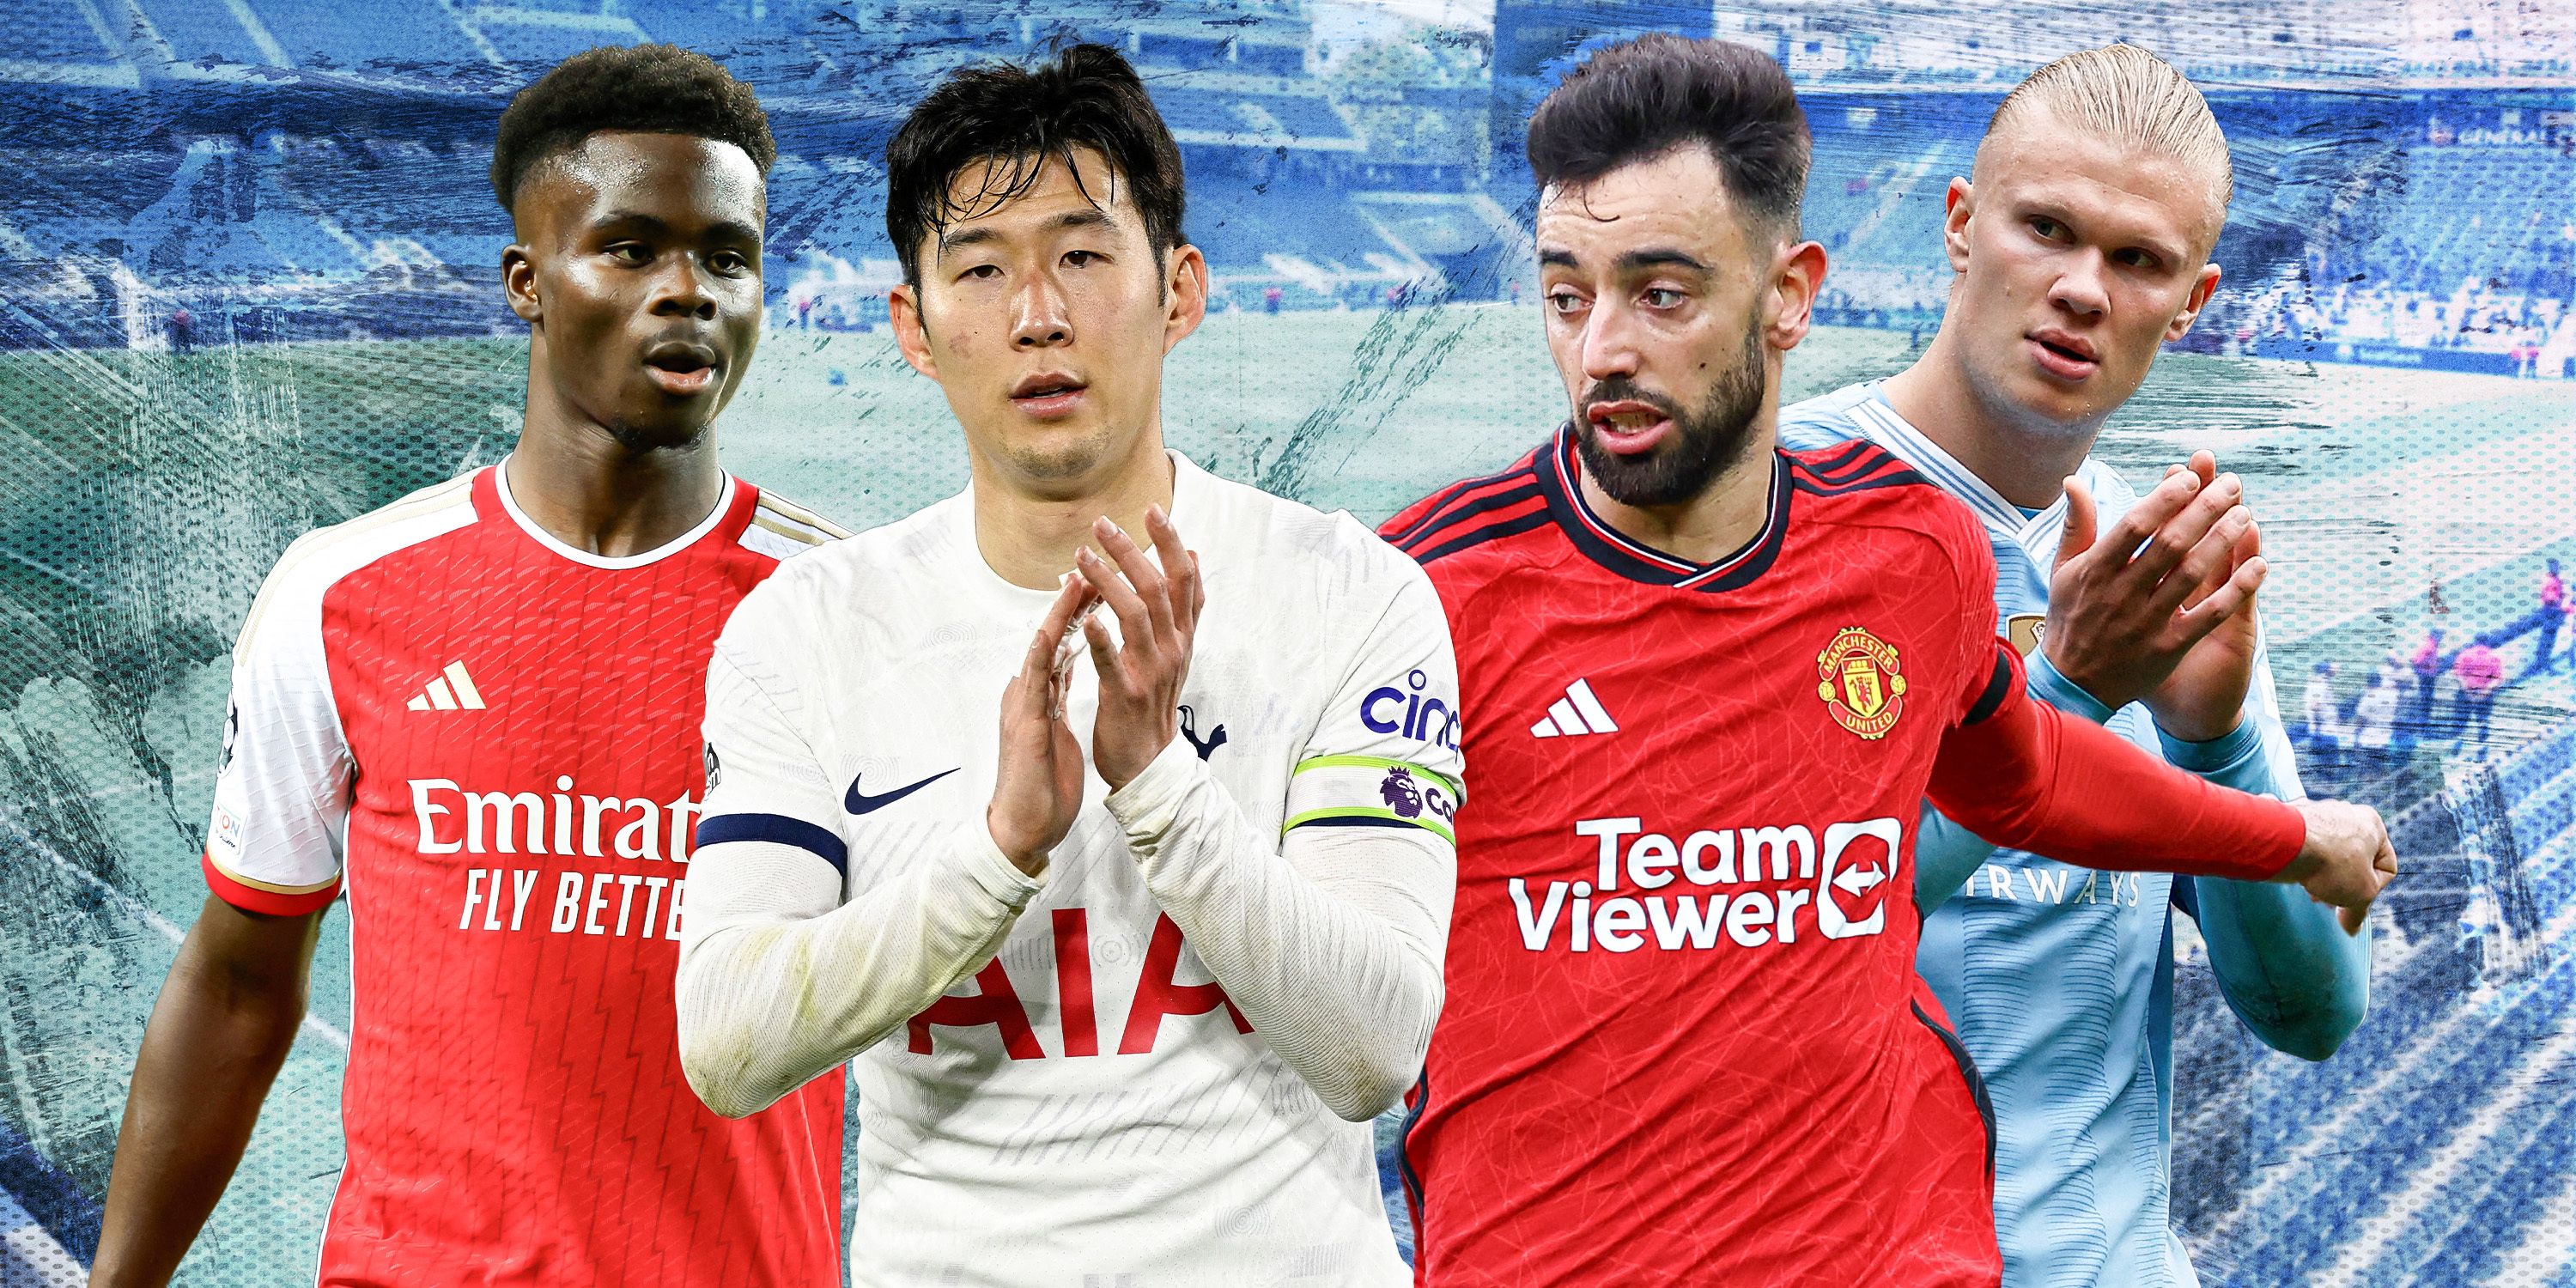 A custom image of Arsenal's Bukayo Saka, Tottenham's Son Heung-min, Manchester United's Bruno Fernandes and Manchester City's Erling Haaland